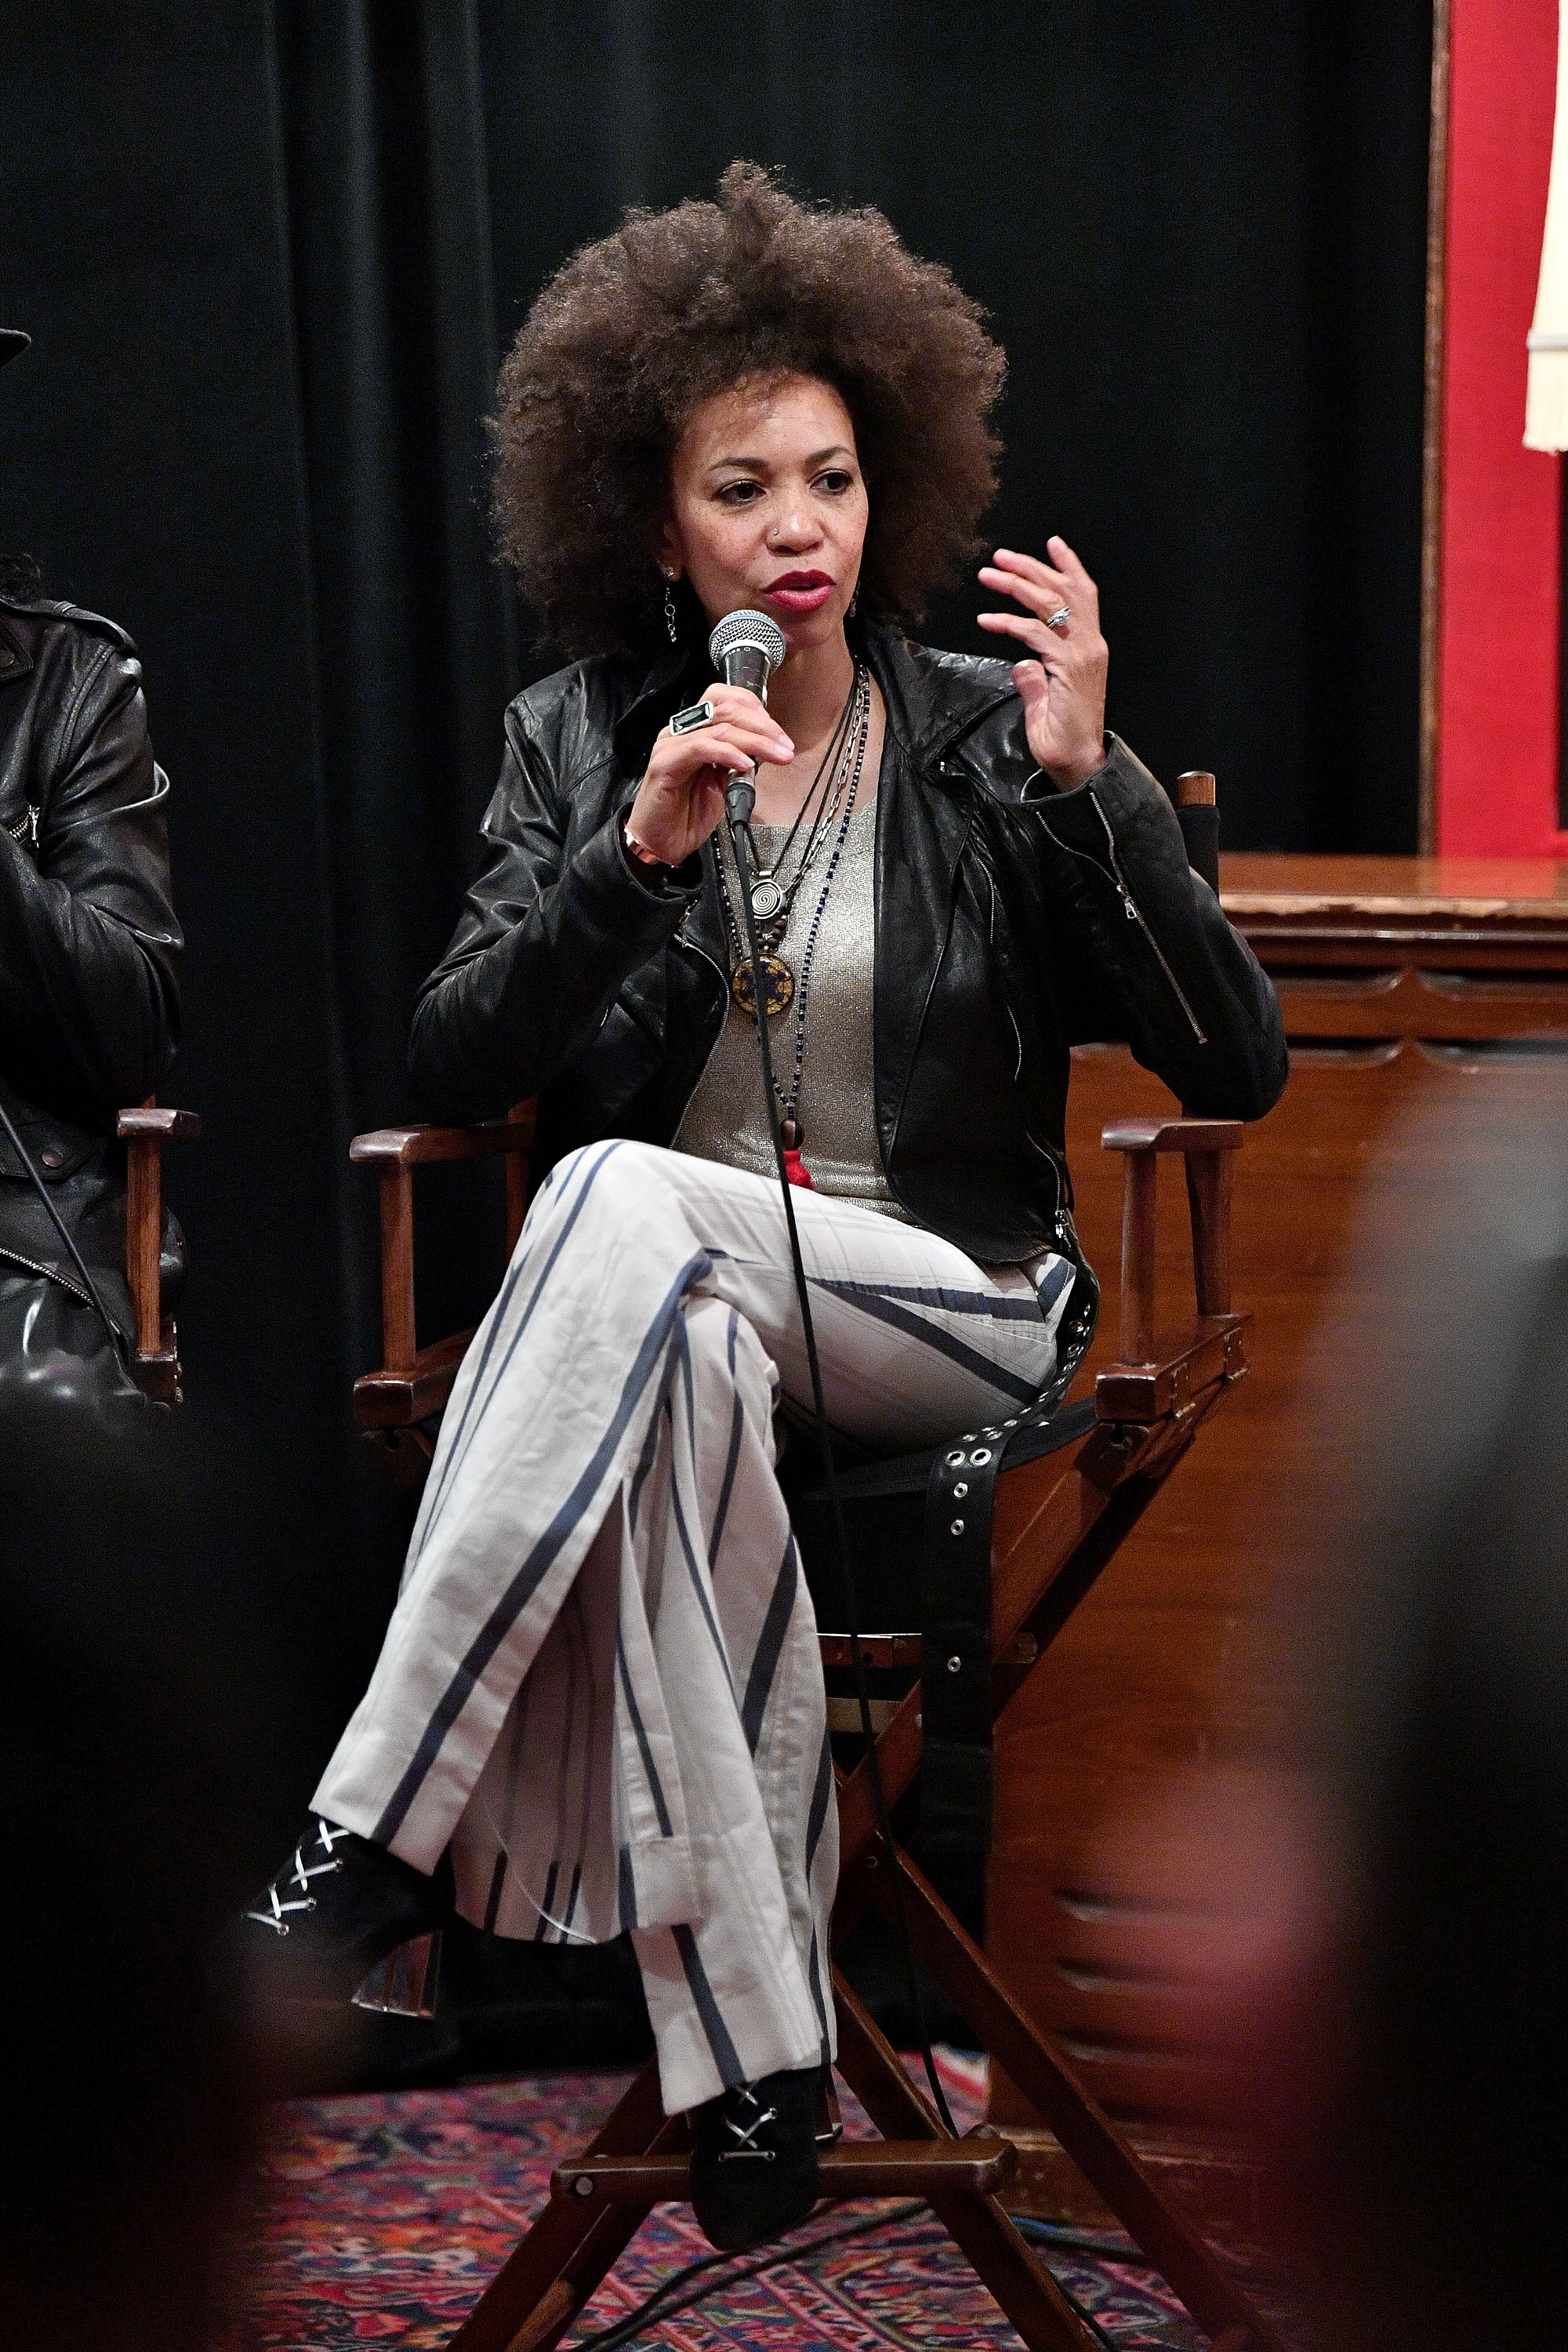 Cindy Blackman Santana at the Santana and The Isley Brothers media event on August 1, 2017, in New York  | Source: Getty Images